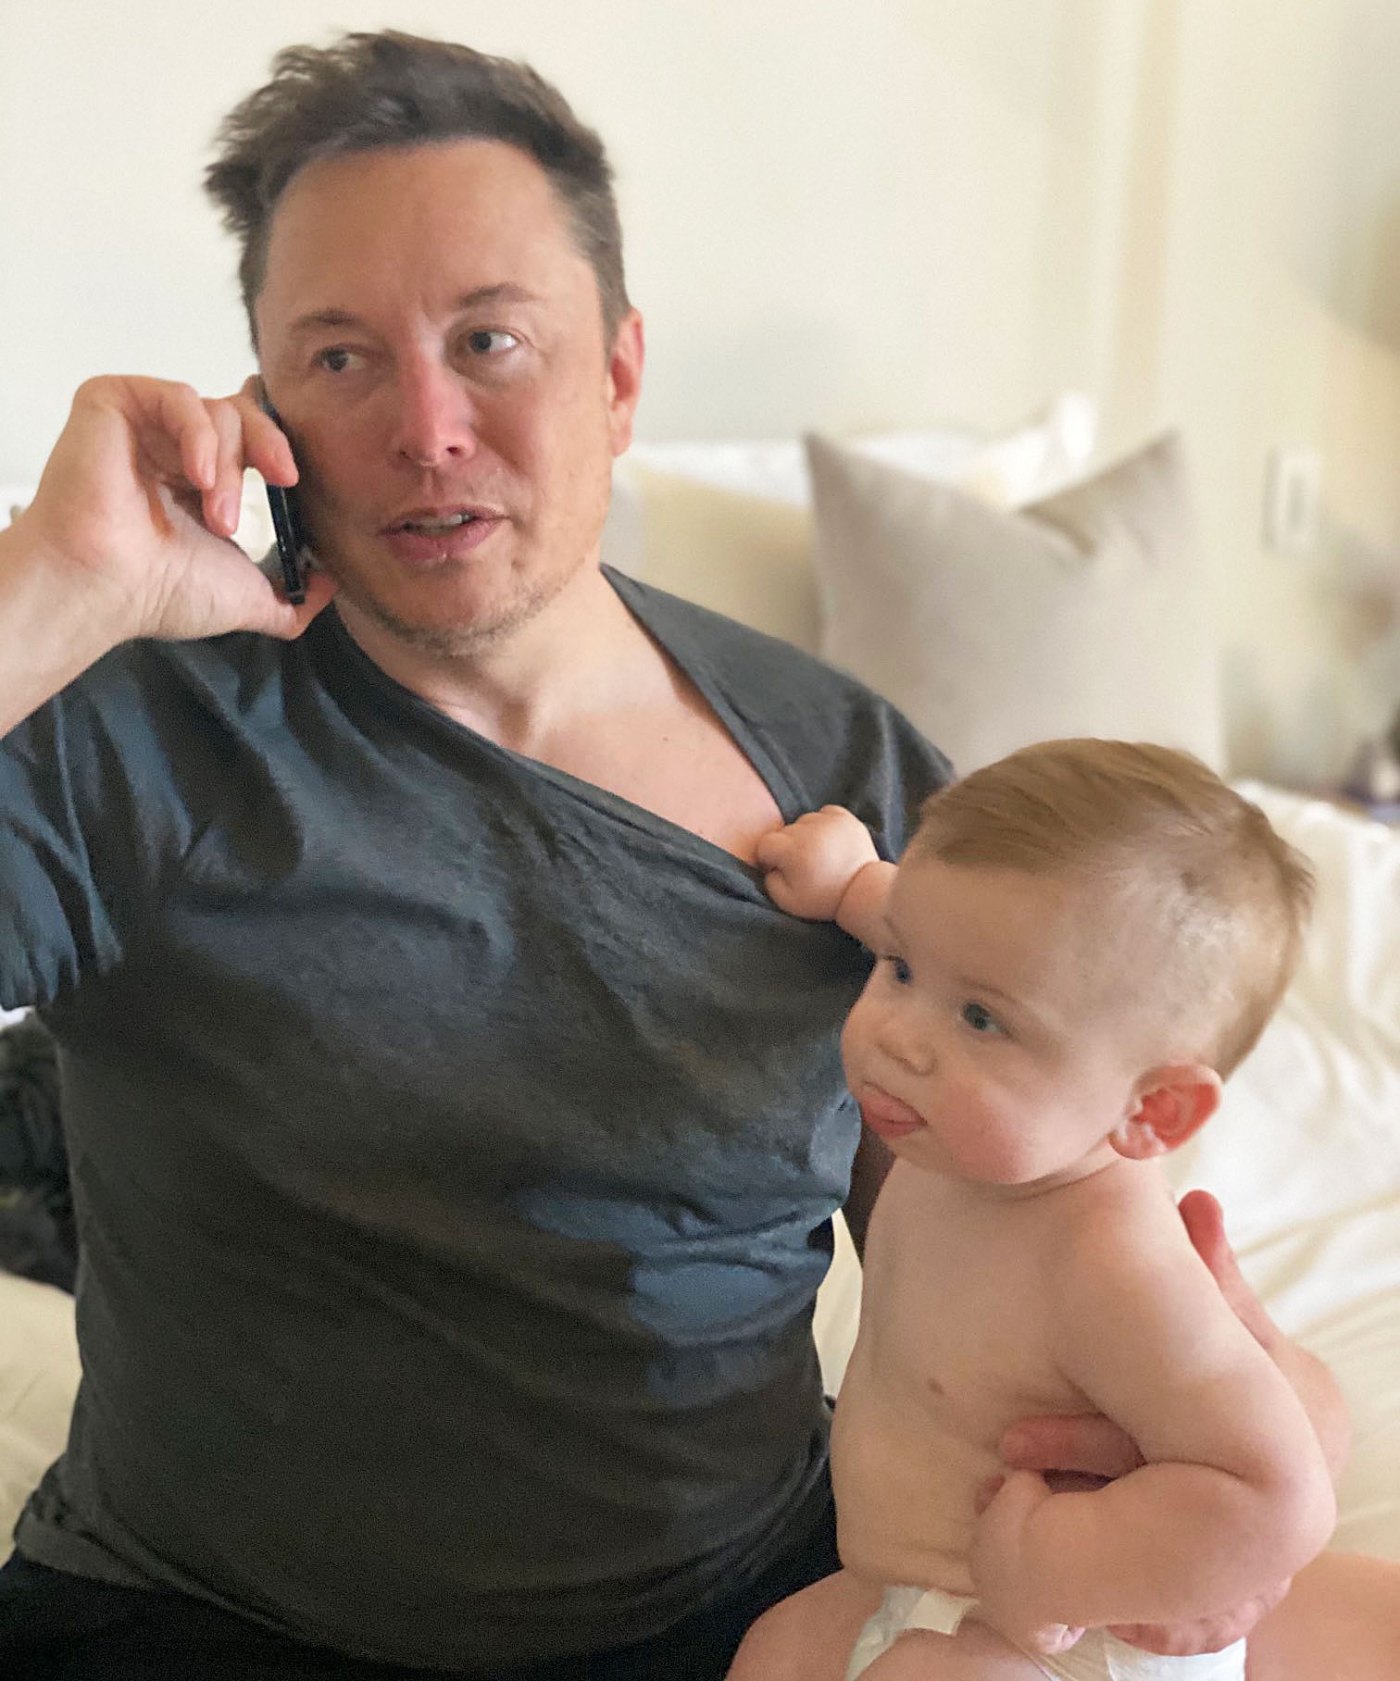 Elon Musk Is 'Very Involved' Coparenting Son X AE A-XII With Grimes